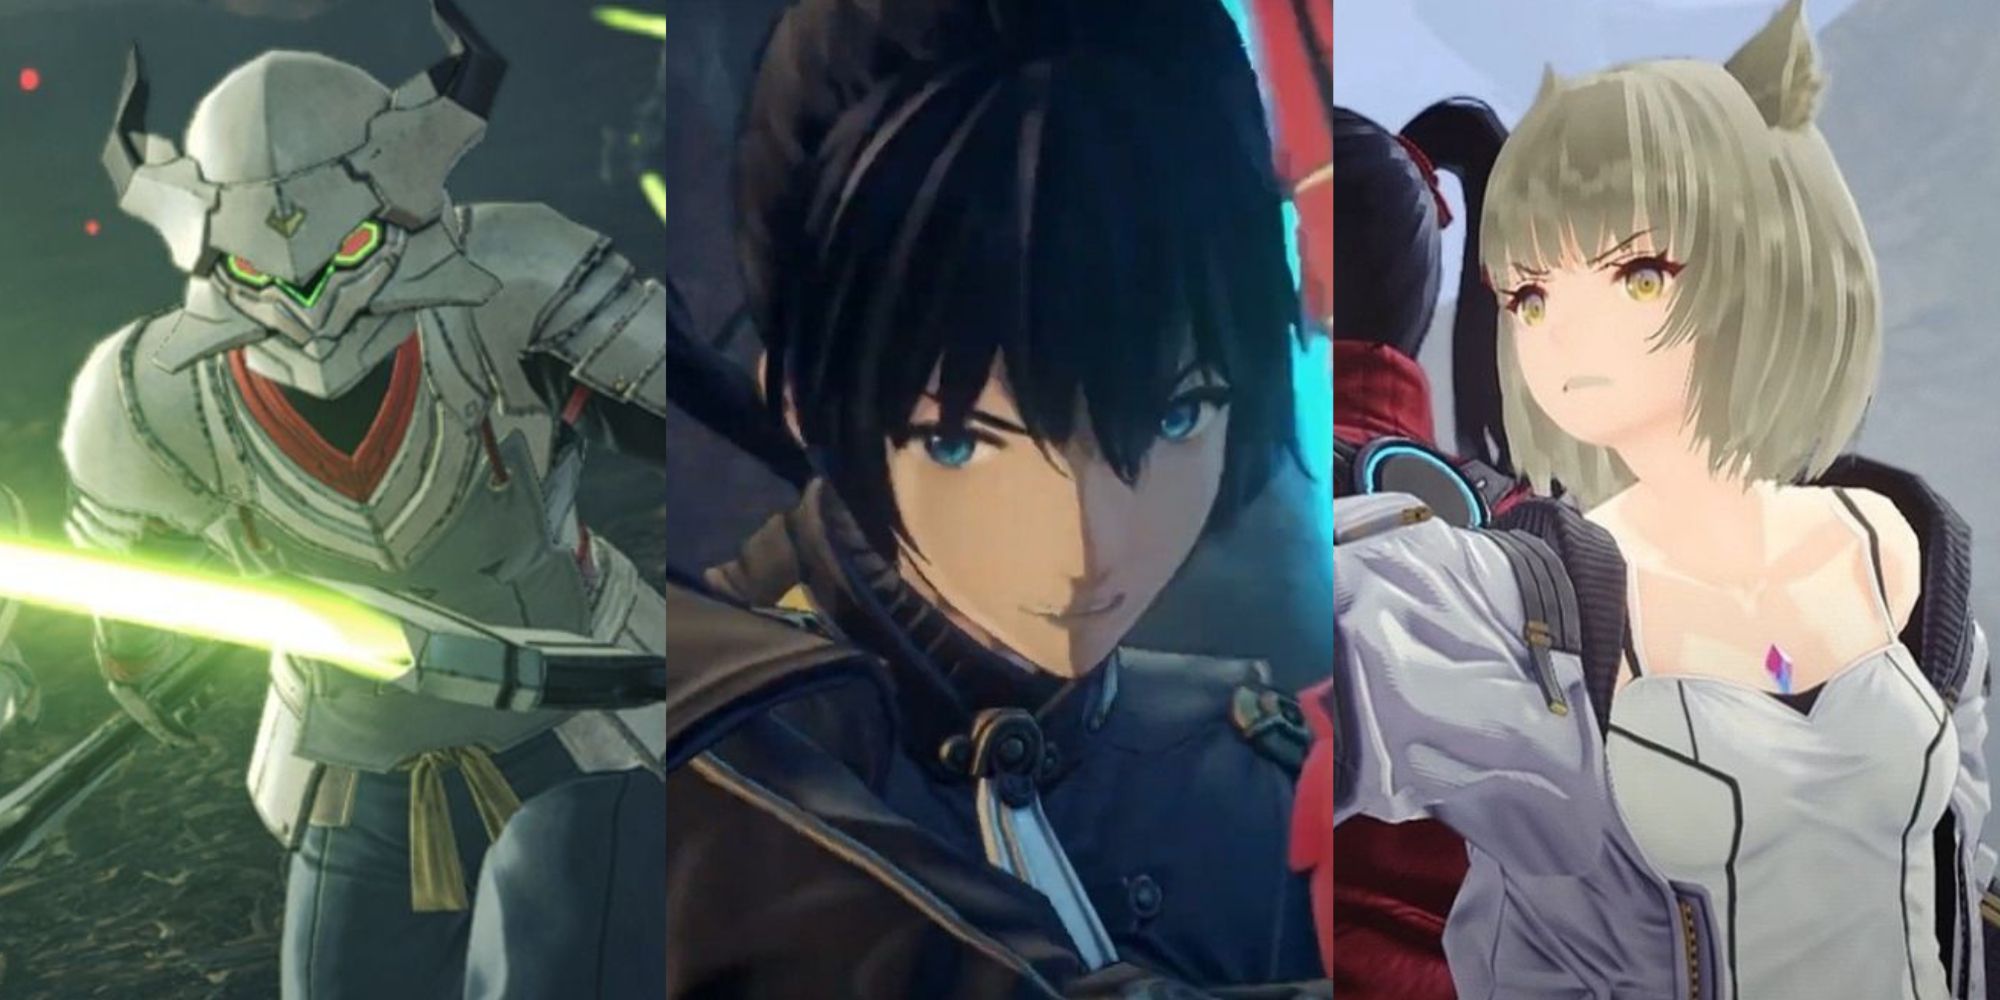 A split image of characters from Xenoblade Chronicles 3